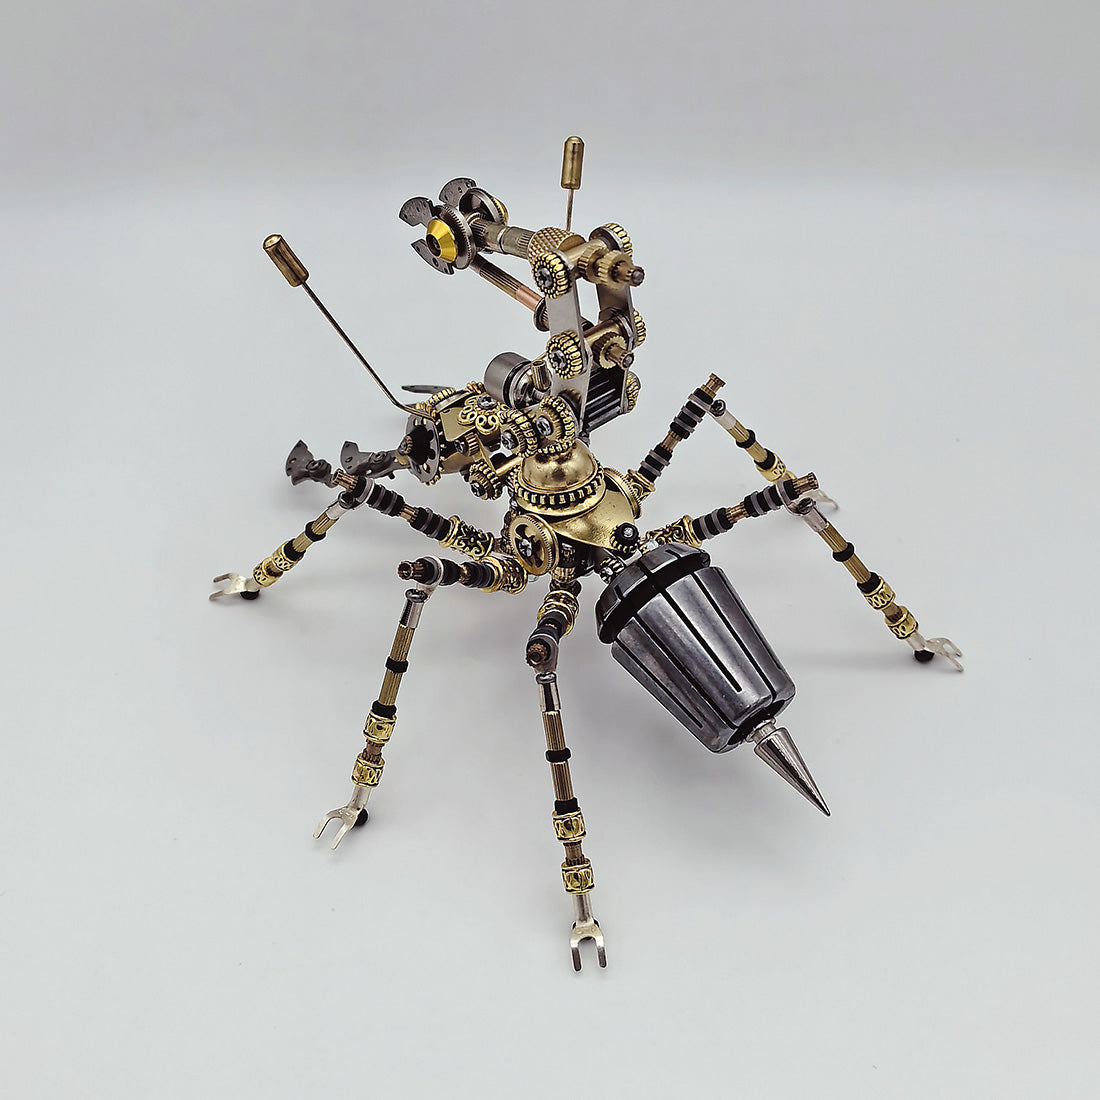 3D Metal Puzzle Worker Ant Steampunk Insect DIY Assembly Model 400+PCS